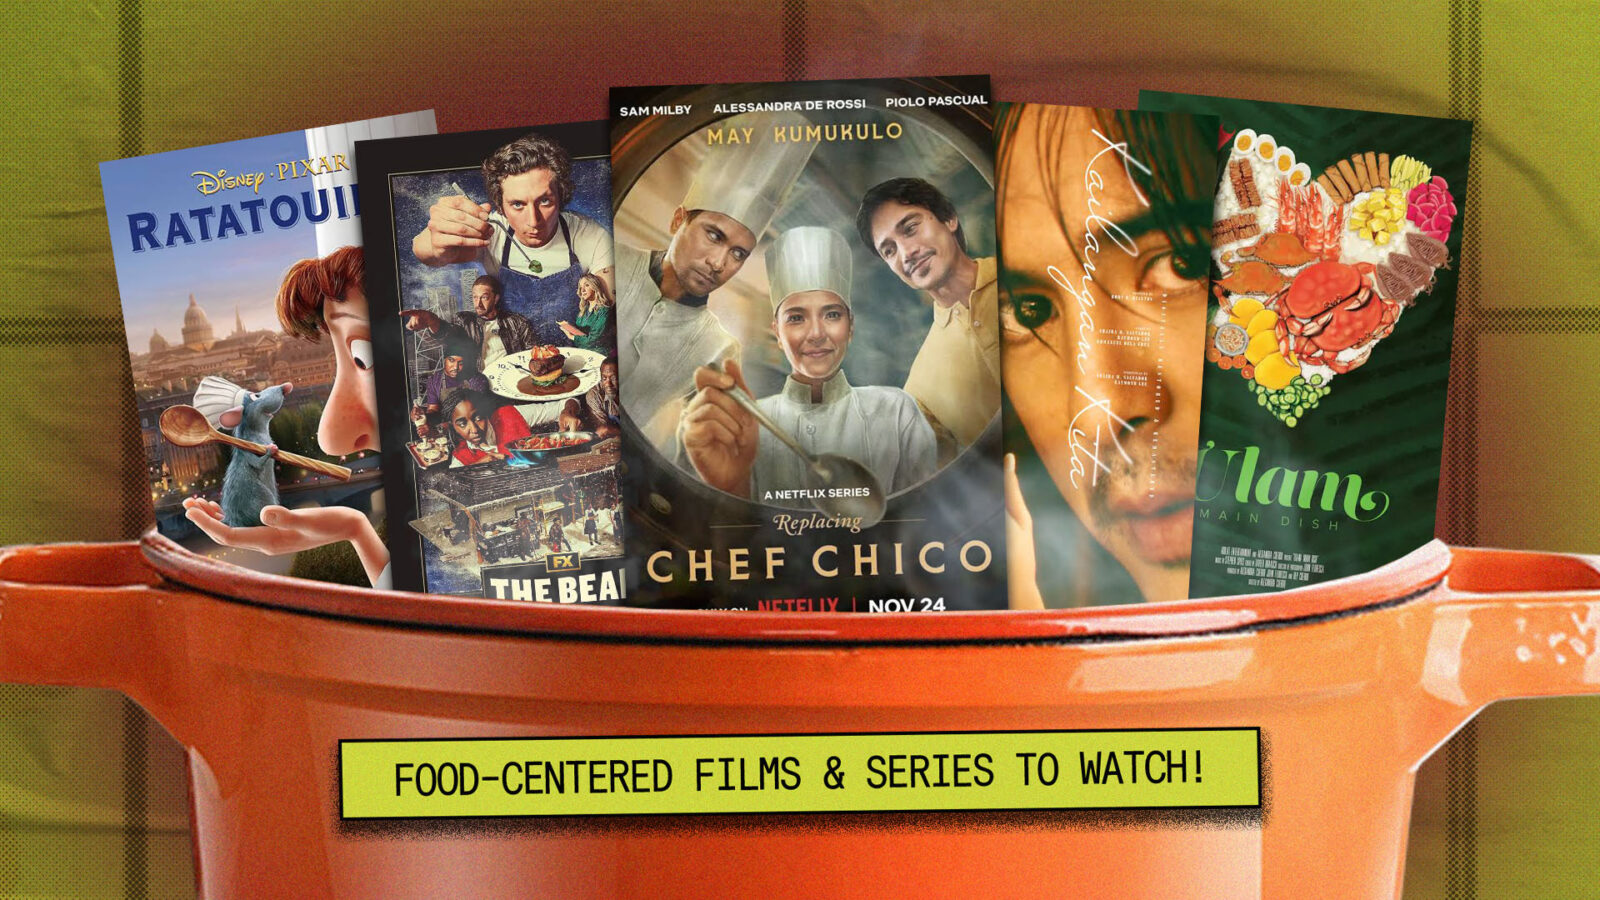 Food-Centered Films and Series To Watch Like Replacing Chef Chico